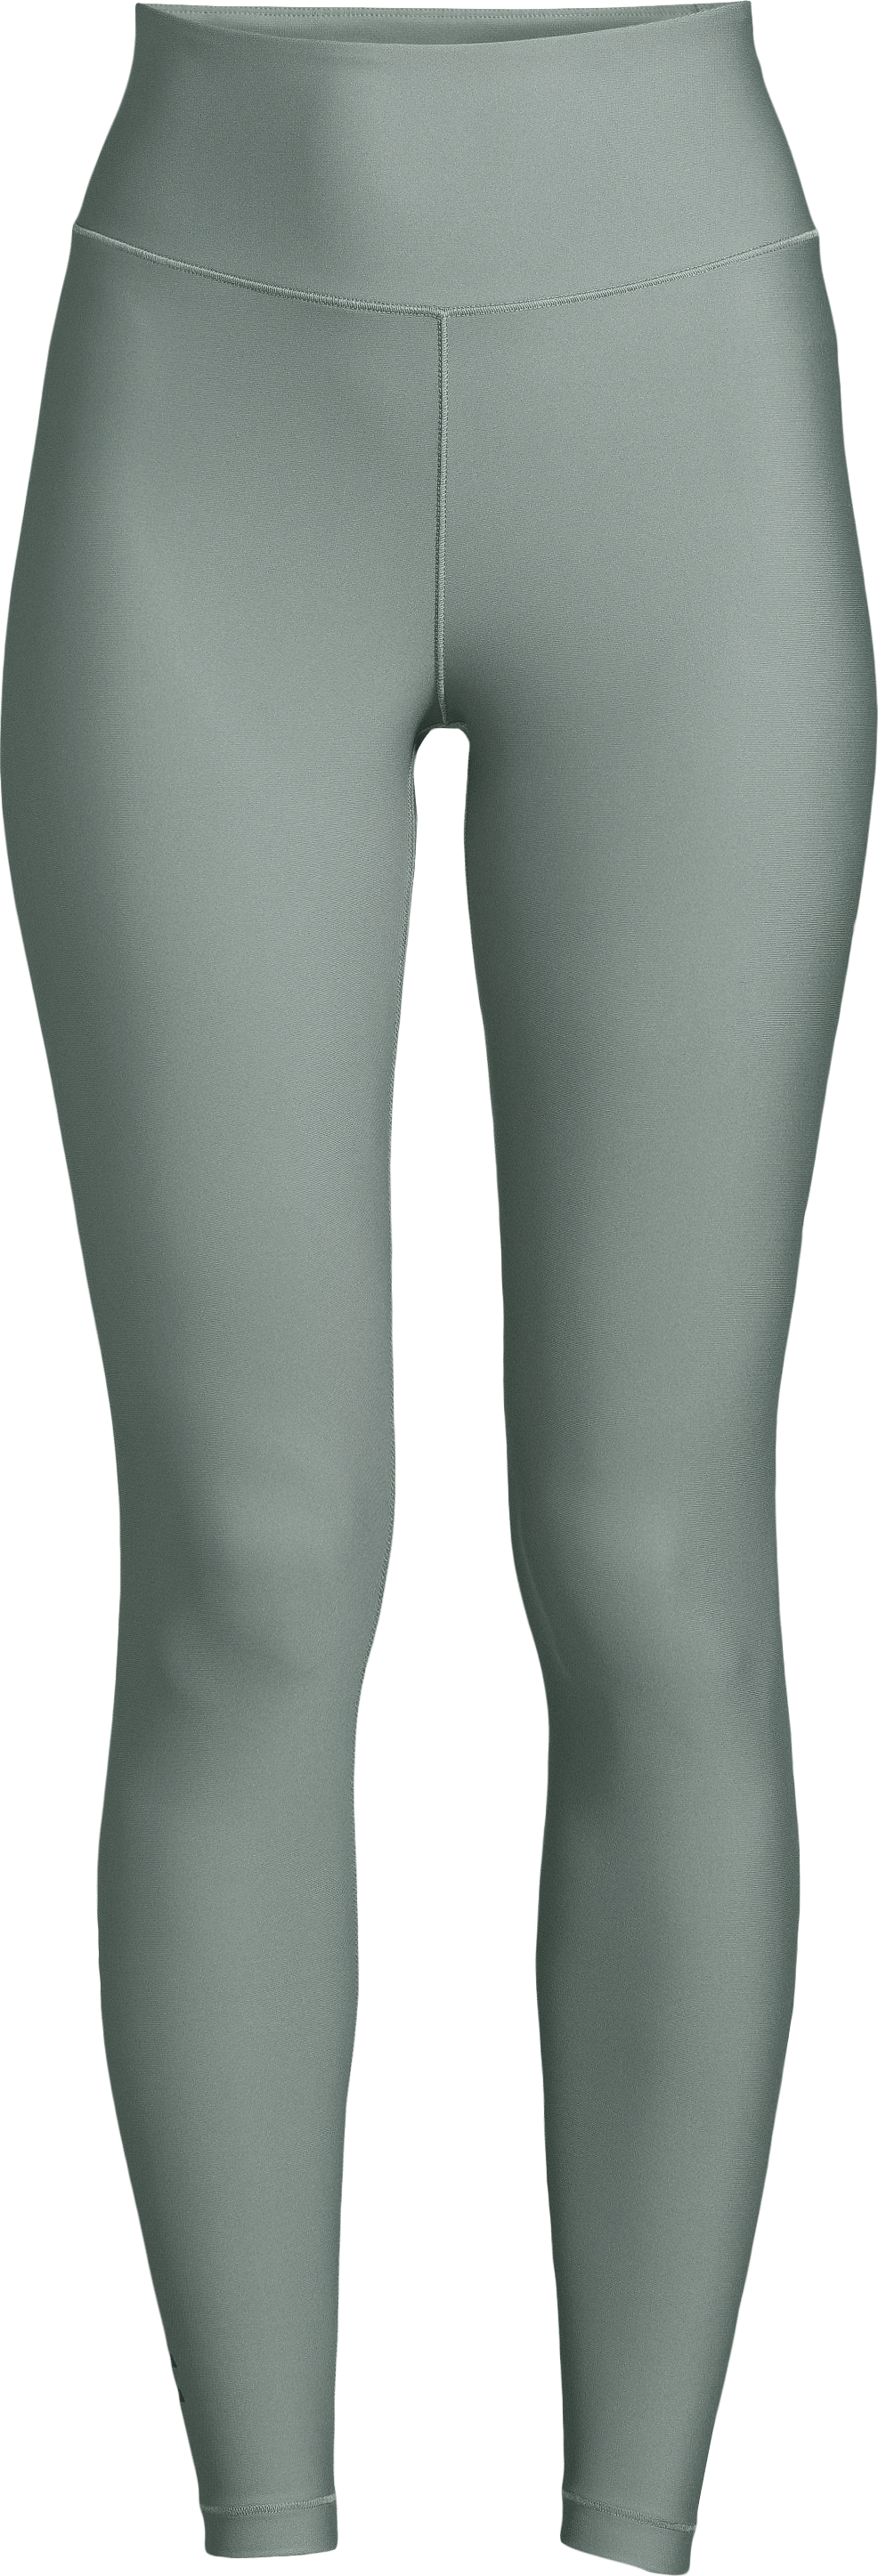 Casall Women's Graphic Sport Tights Dusty Green